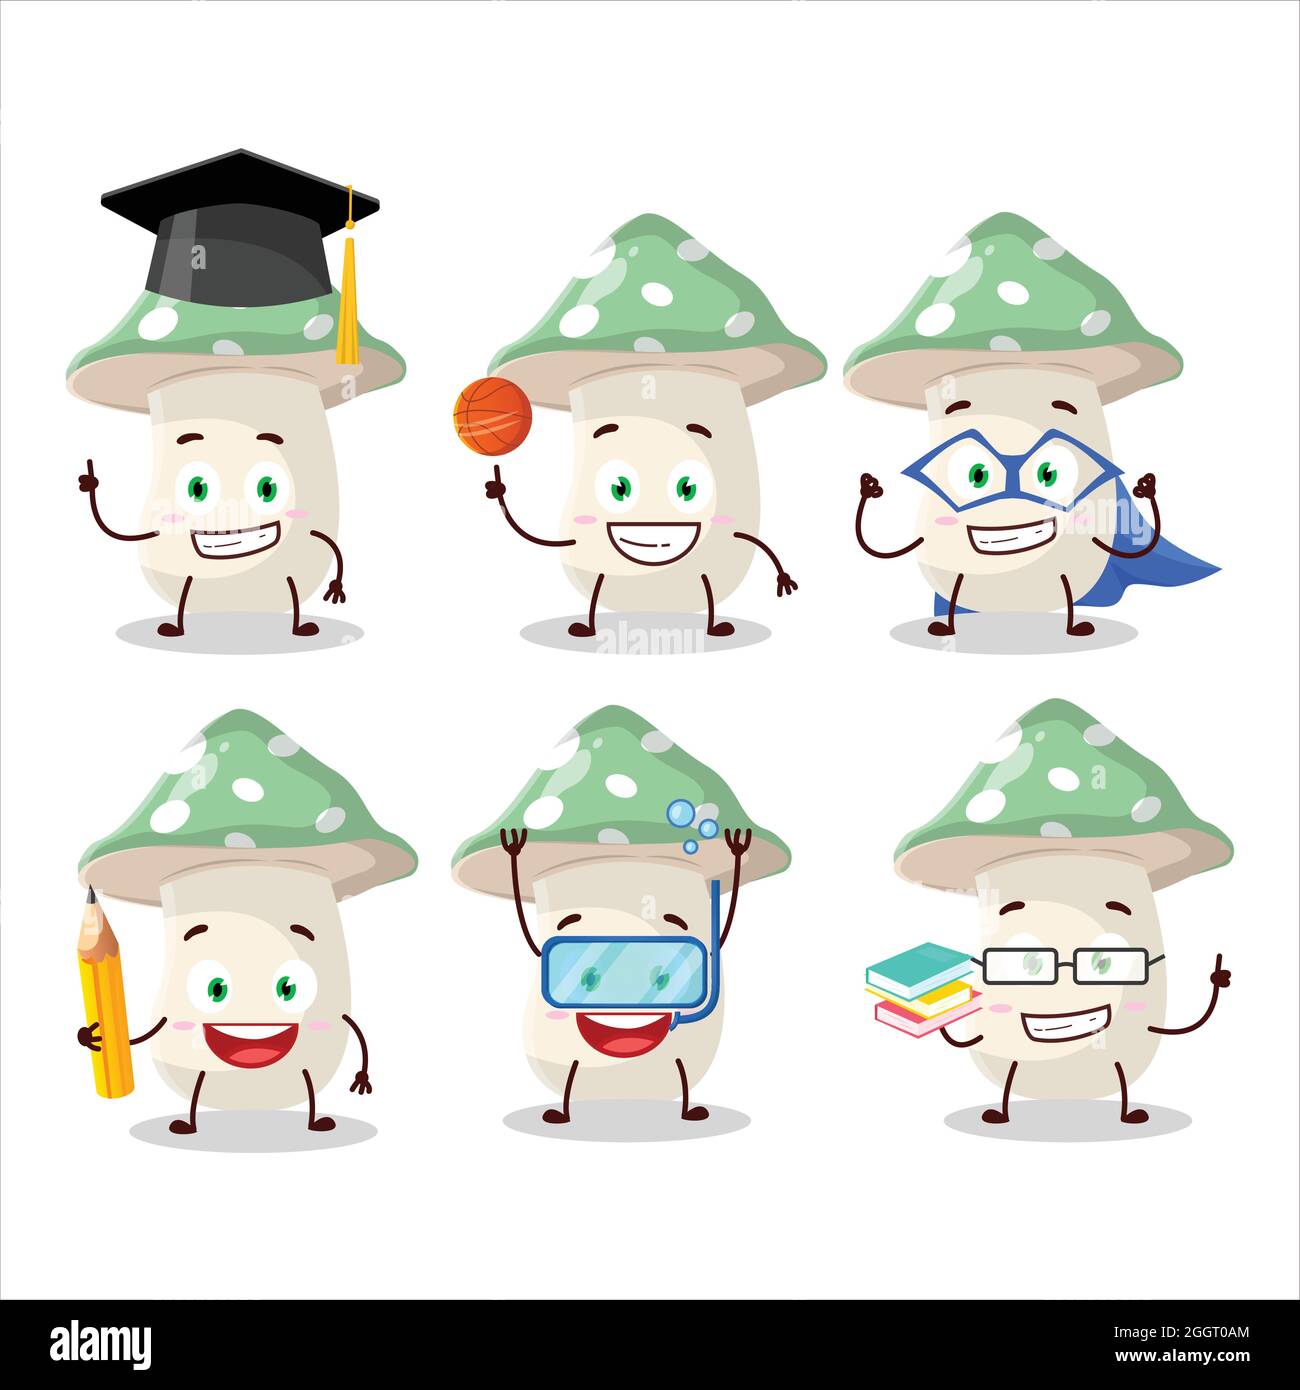 School student of green amanita cartoon character with various expressions. Vector illustration Stock Vector